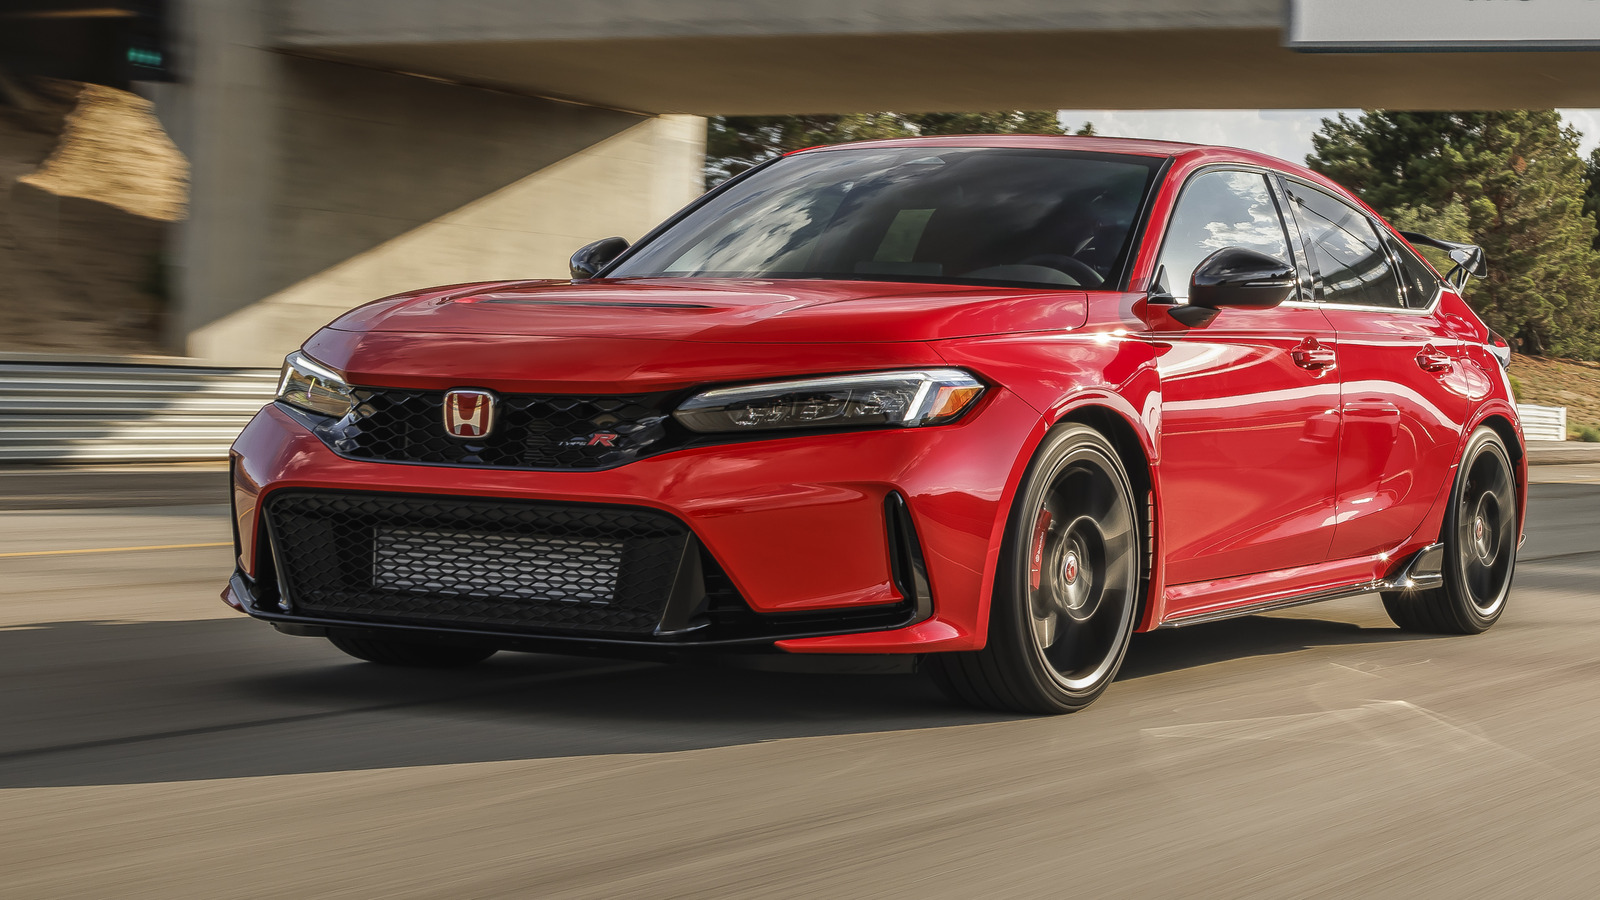 2023 Honda Civic Type R Horsepower Confirmed As HotHatch Gets Serious